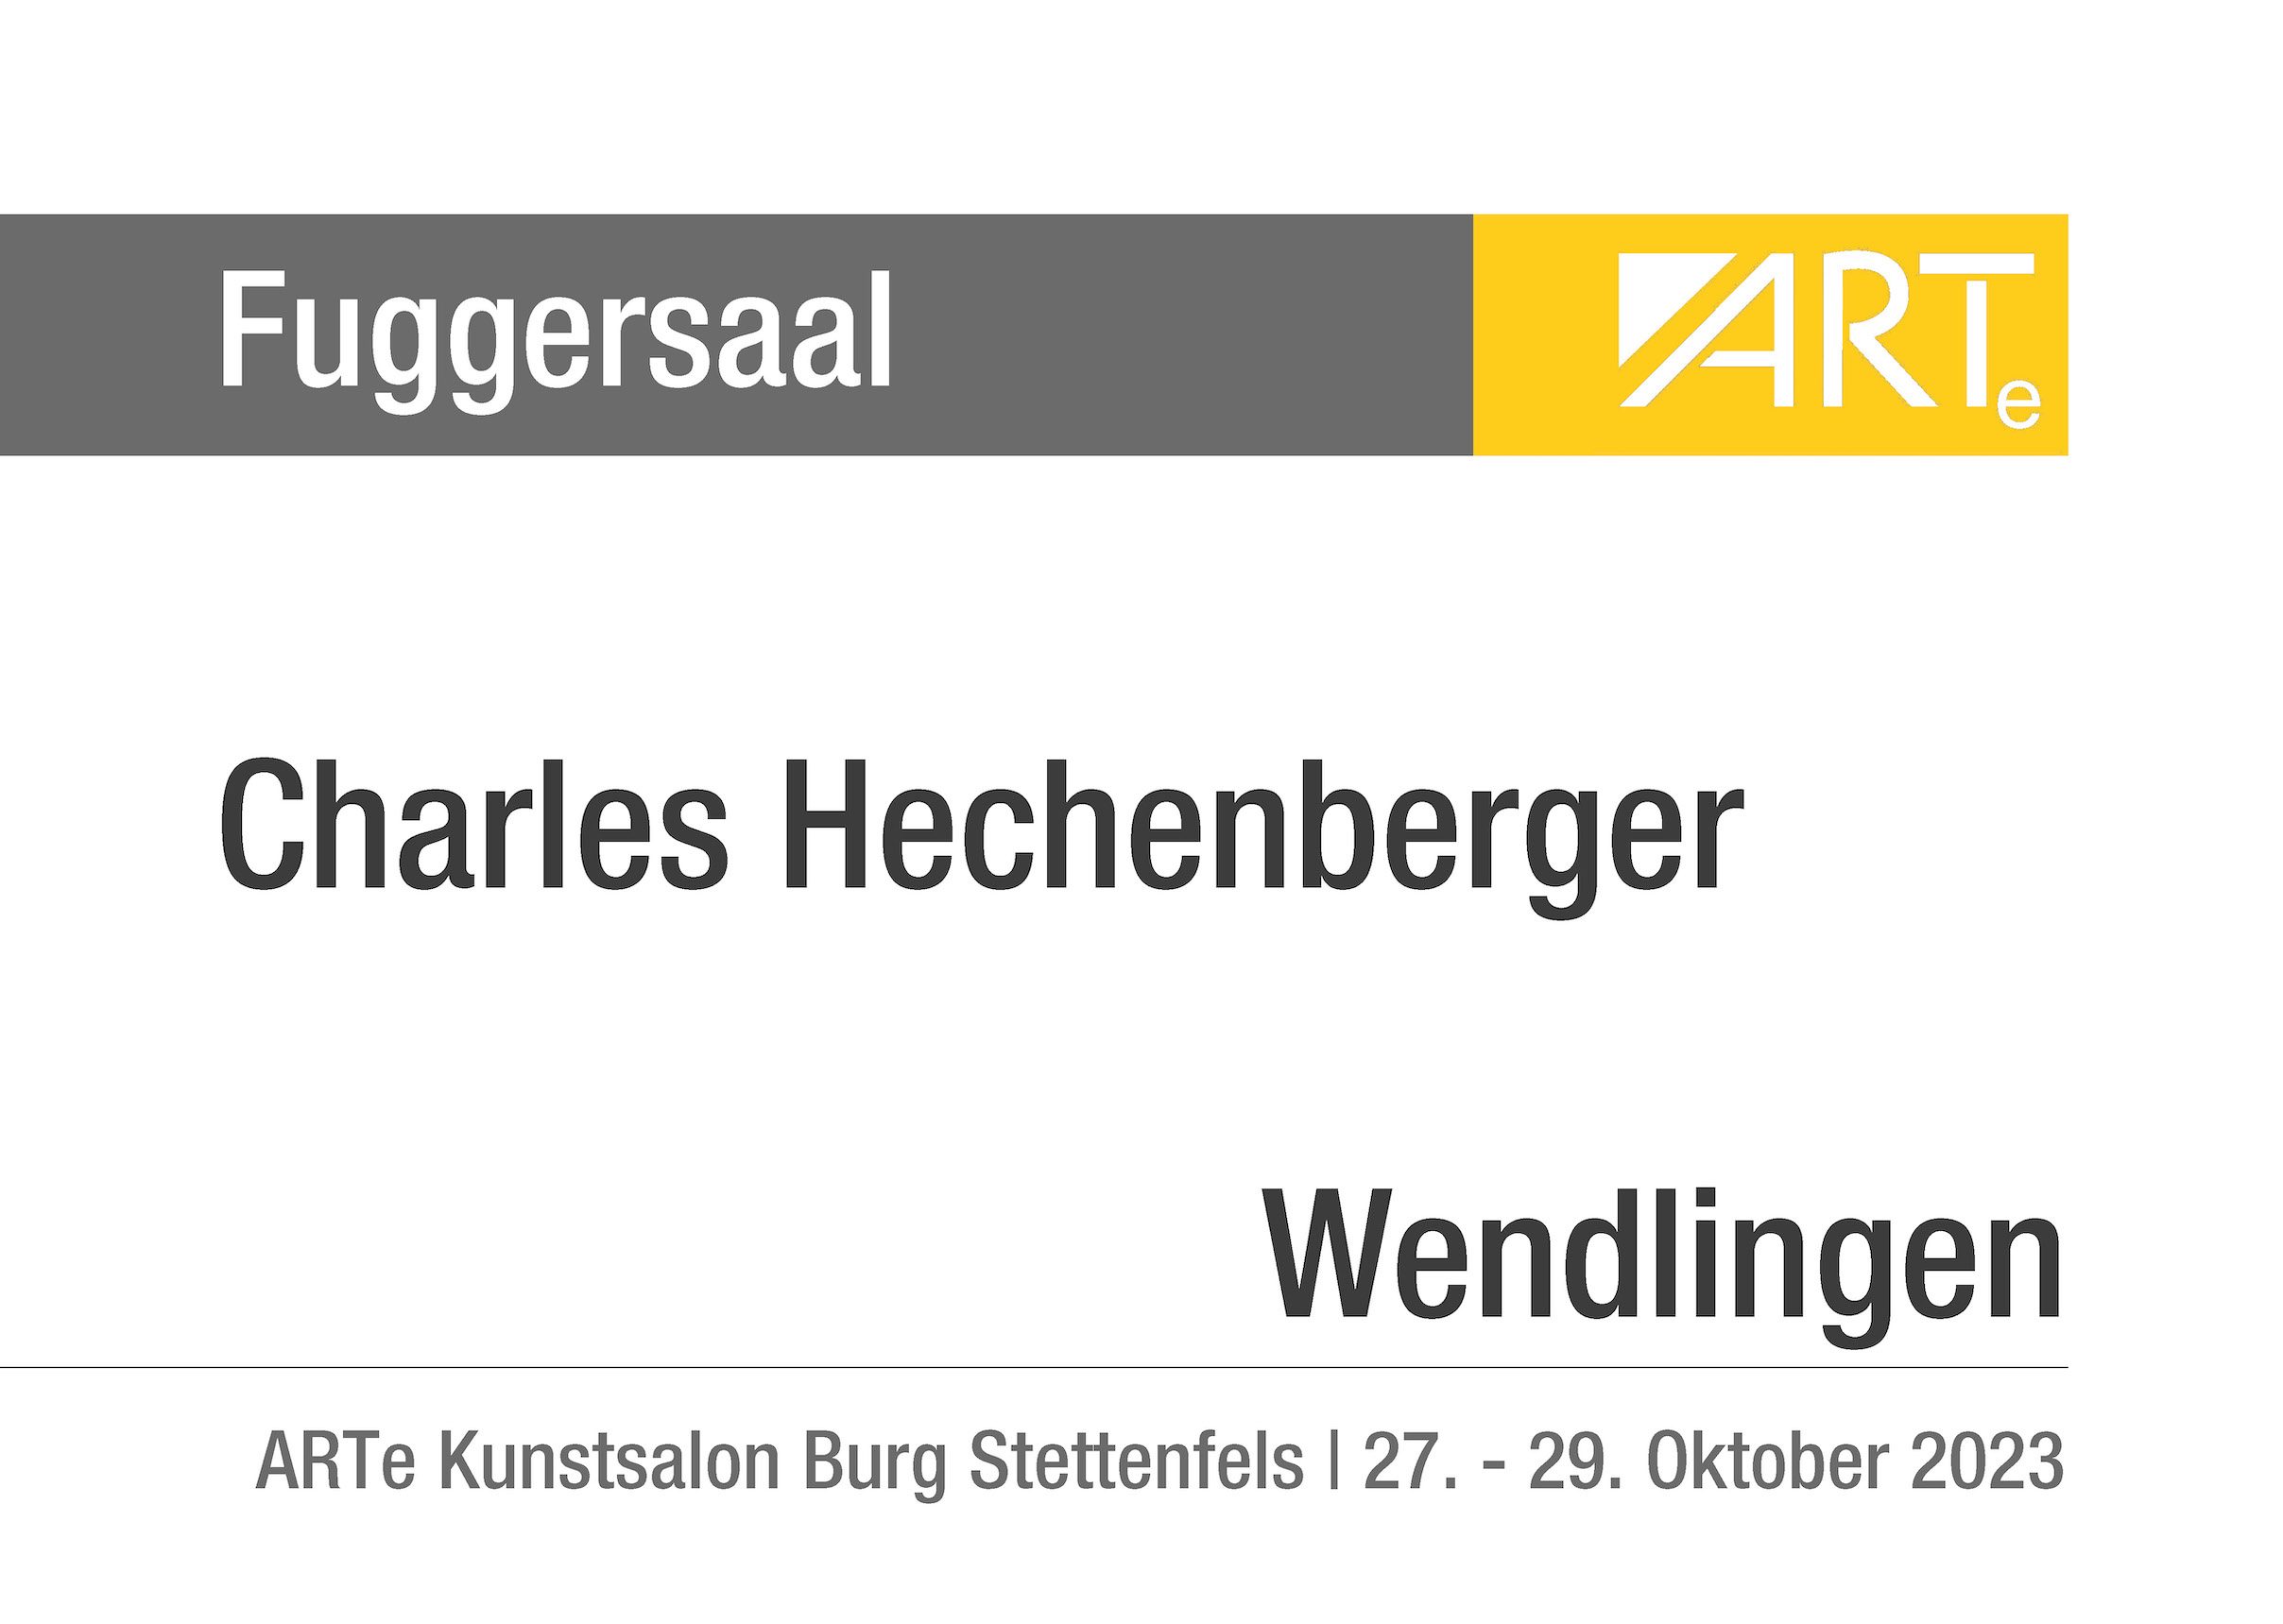 Charles Hechenberger